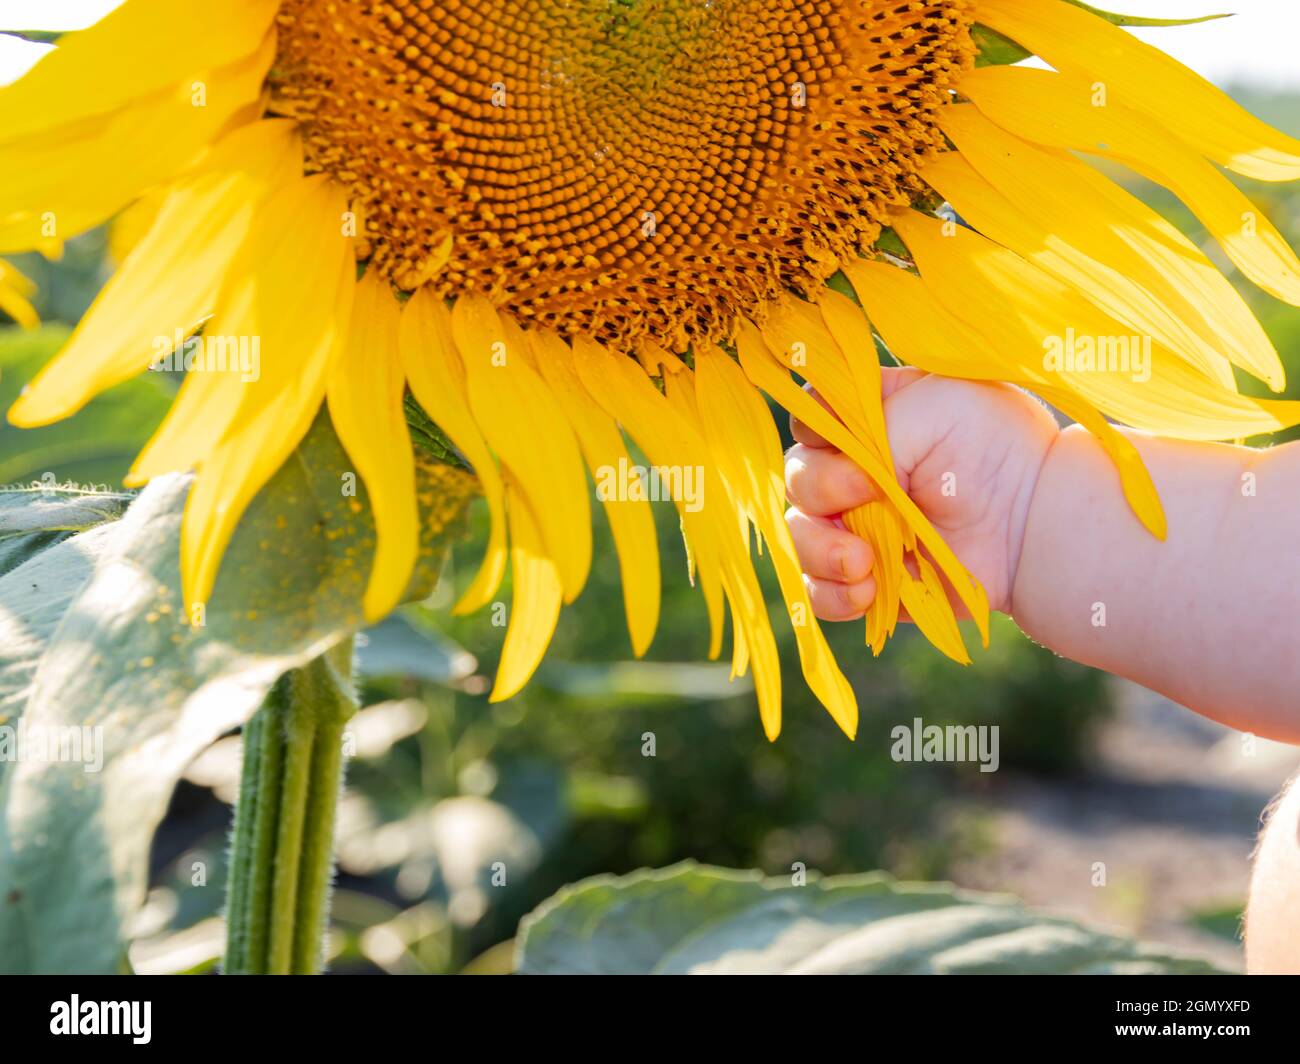 child chubby hand, five months, is touching a yellow sunflower flower, close-up Stock Photo